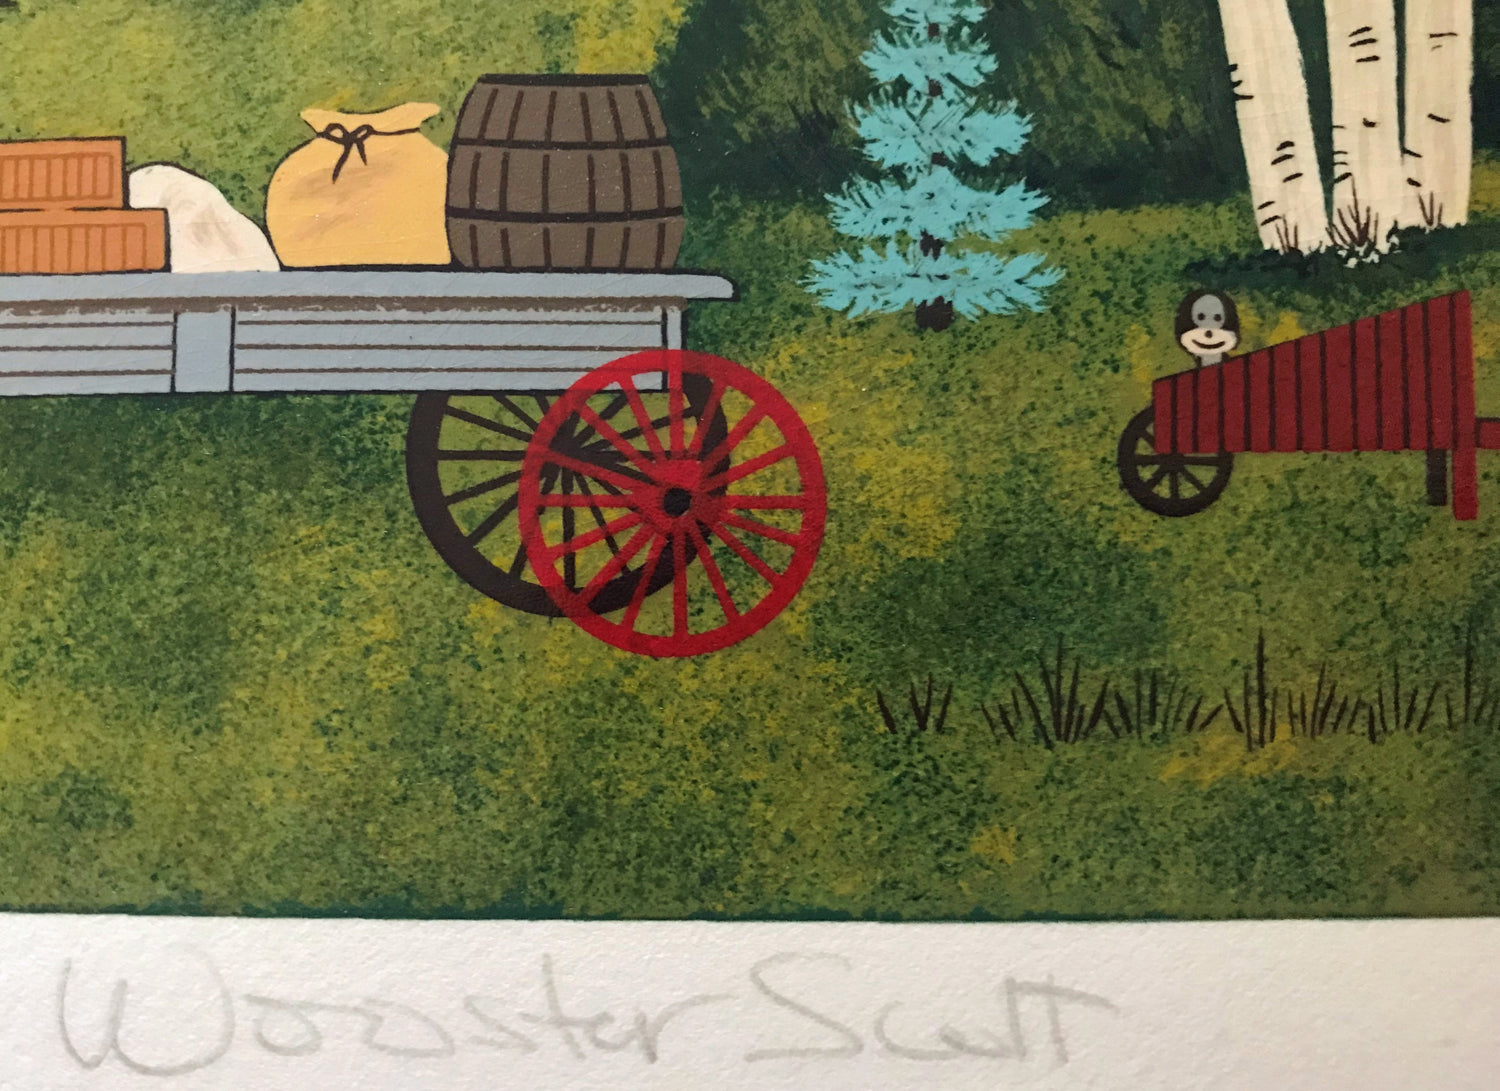 Good Neighbor Jane Wooster Scott Artist Proof Serigraph Print Artist Hand Signed and Numbered with Hand Drawn Remarque